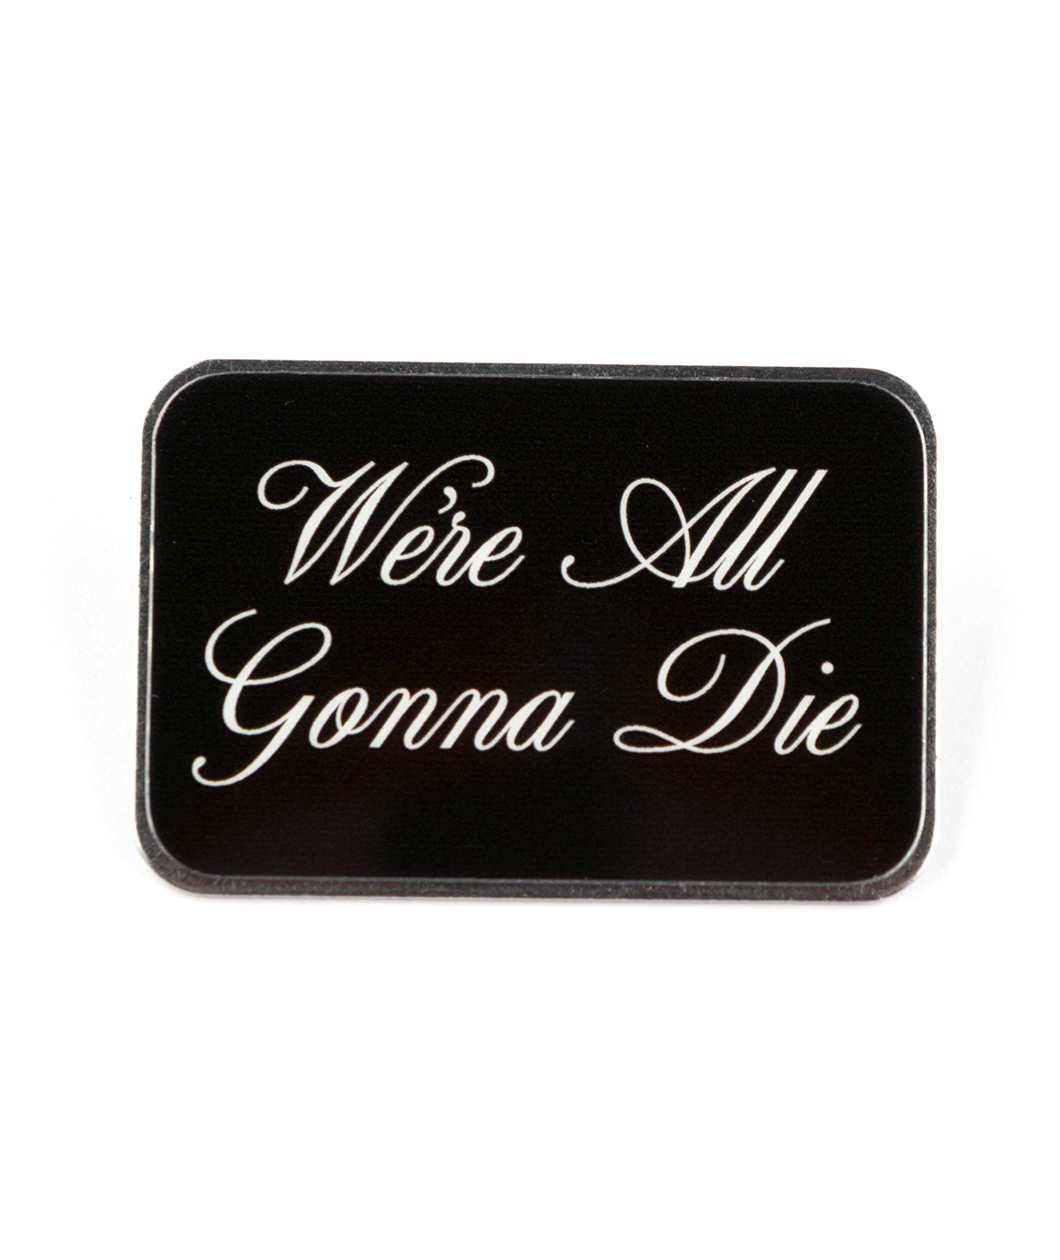 Silver plated pin with digitally printed text, 